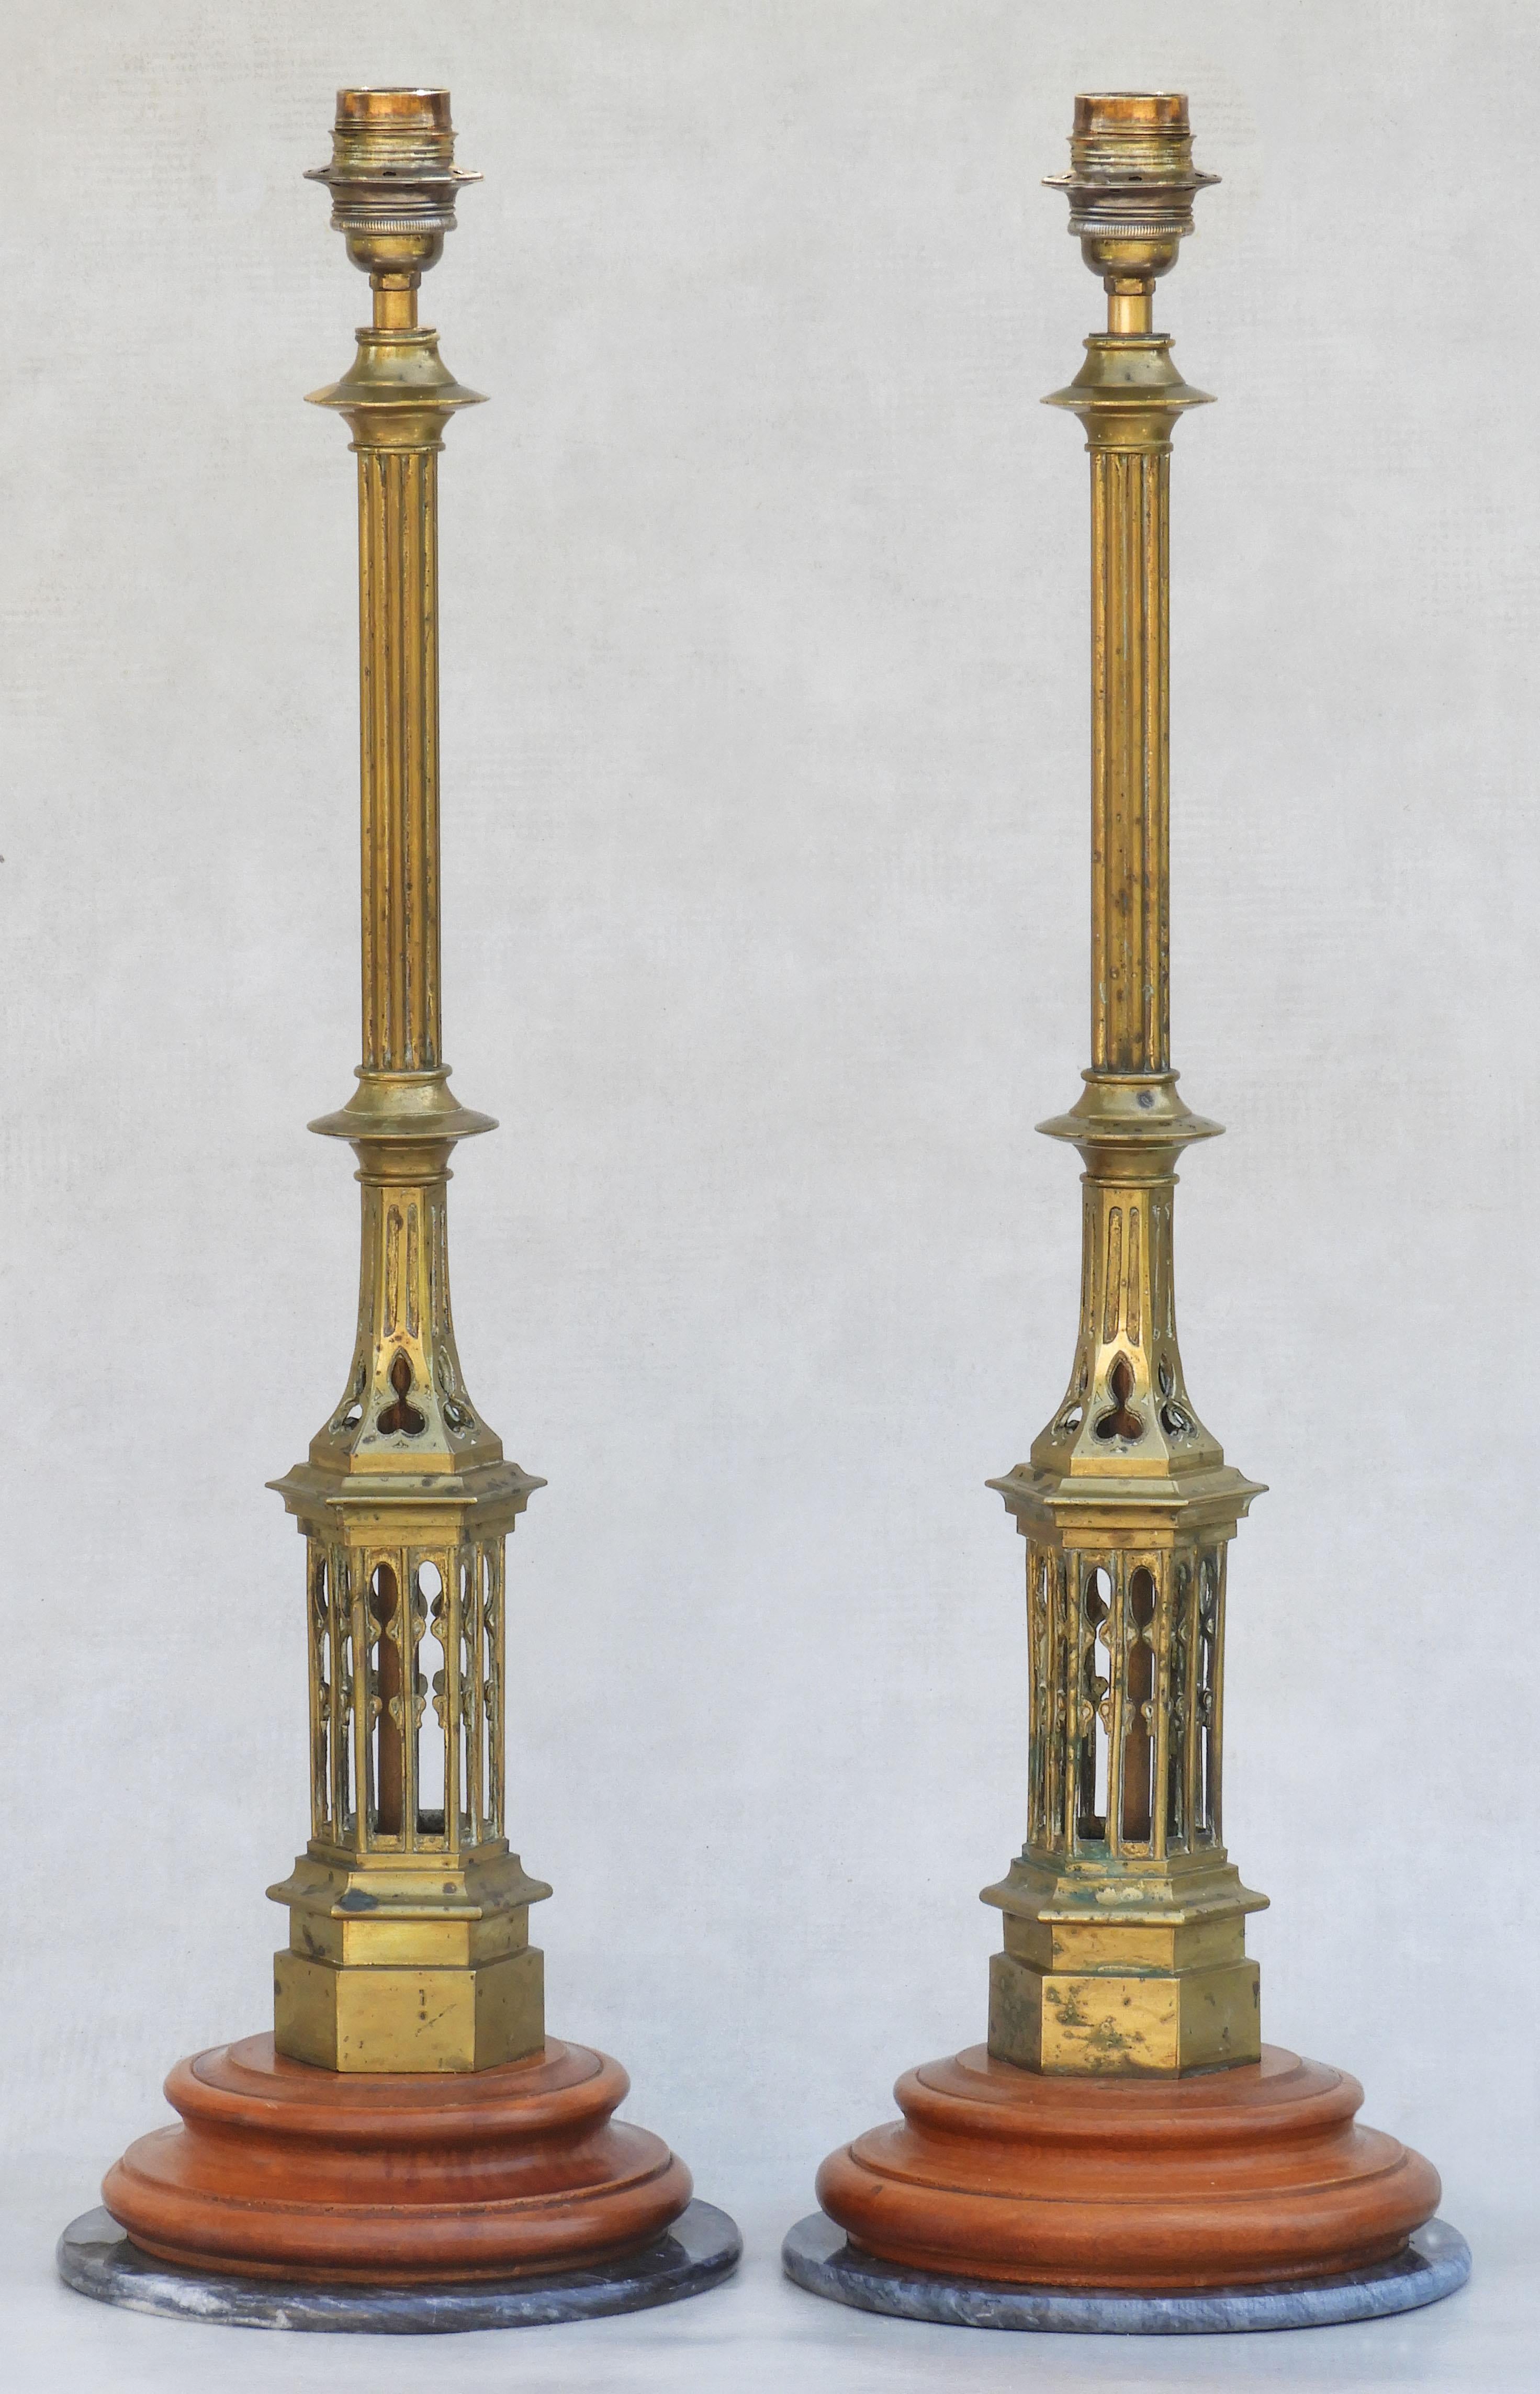 A duo of tall, brass, Arts and Crafts lamps.  An unusual pair of Neo-Gothic architectural elements, later mounted on wood and marble plinths and converted to tabletop lighting.  In good antique condition with nice patina, clean but not